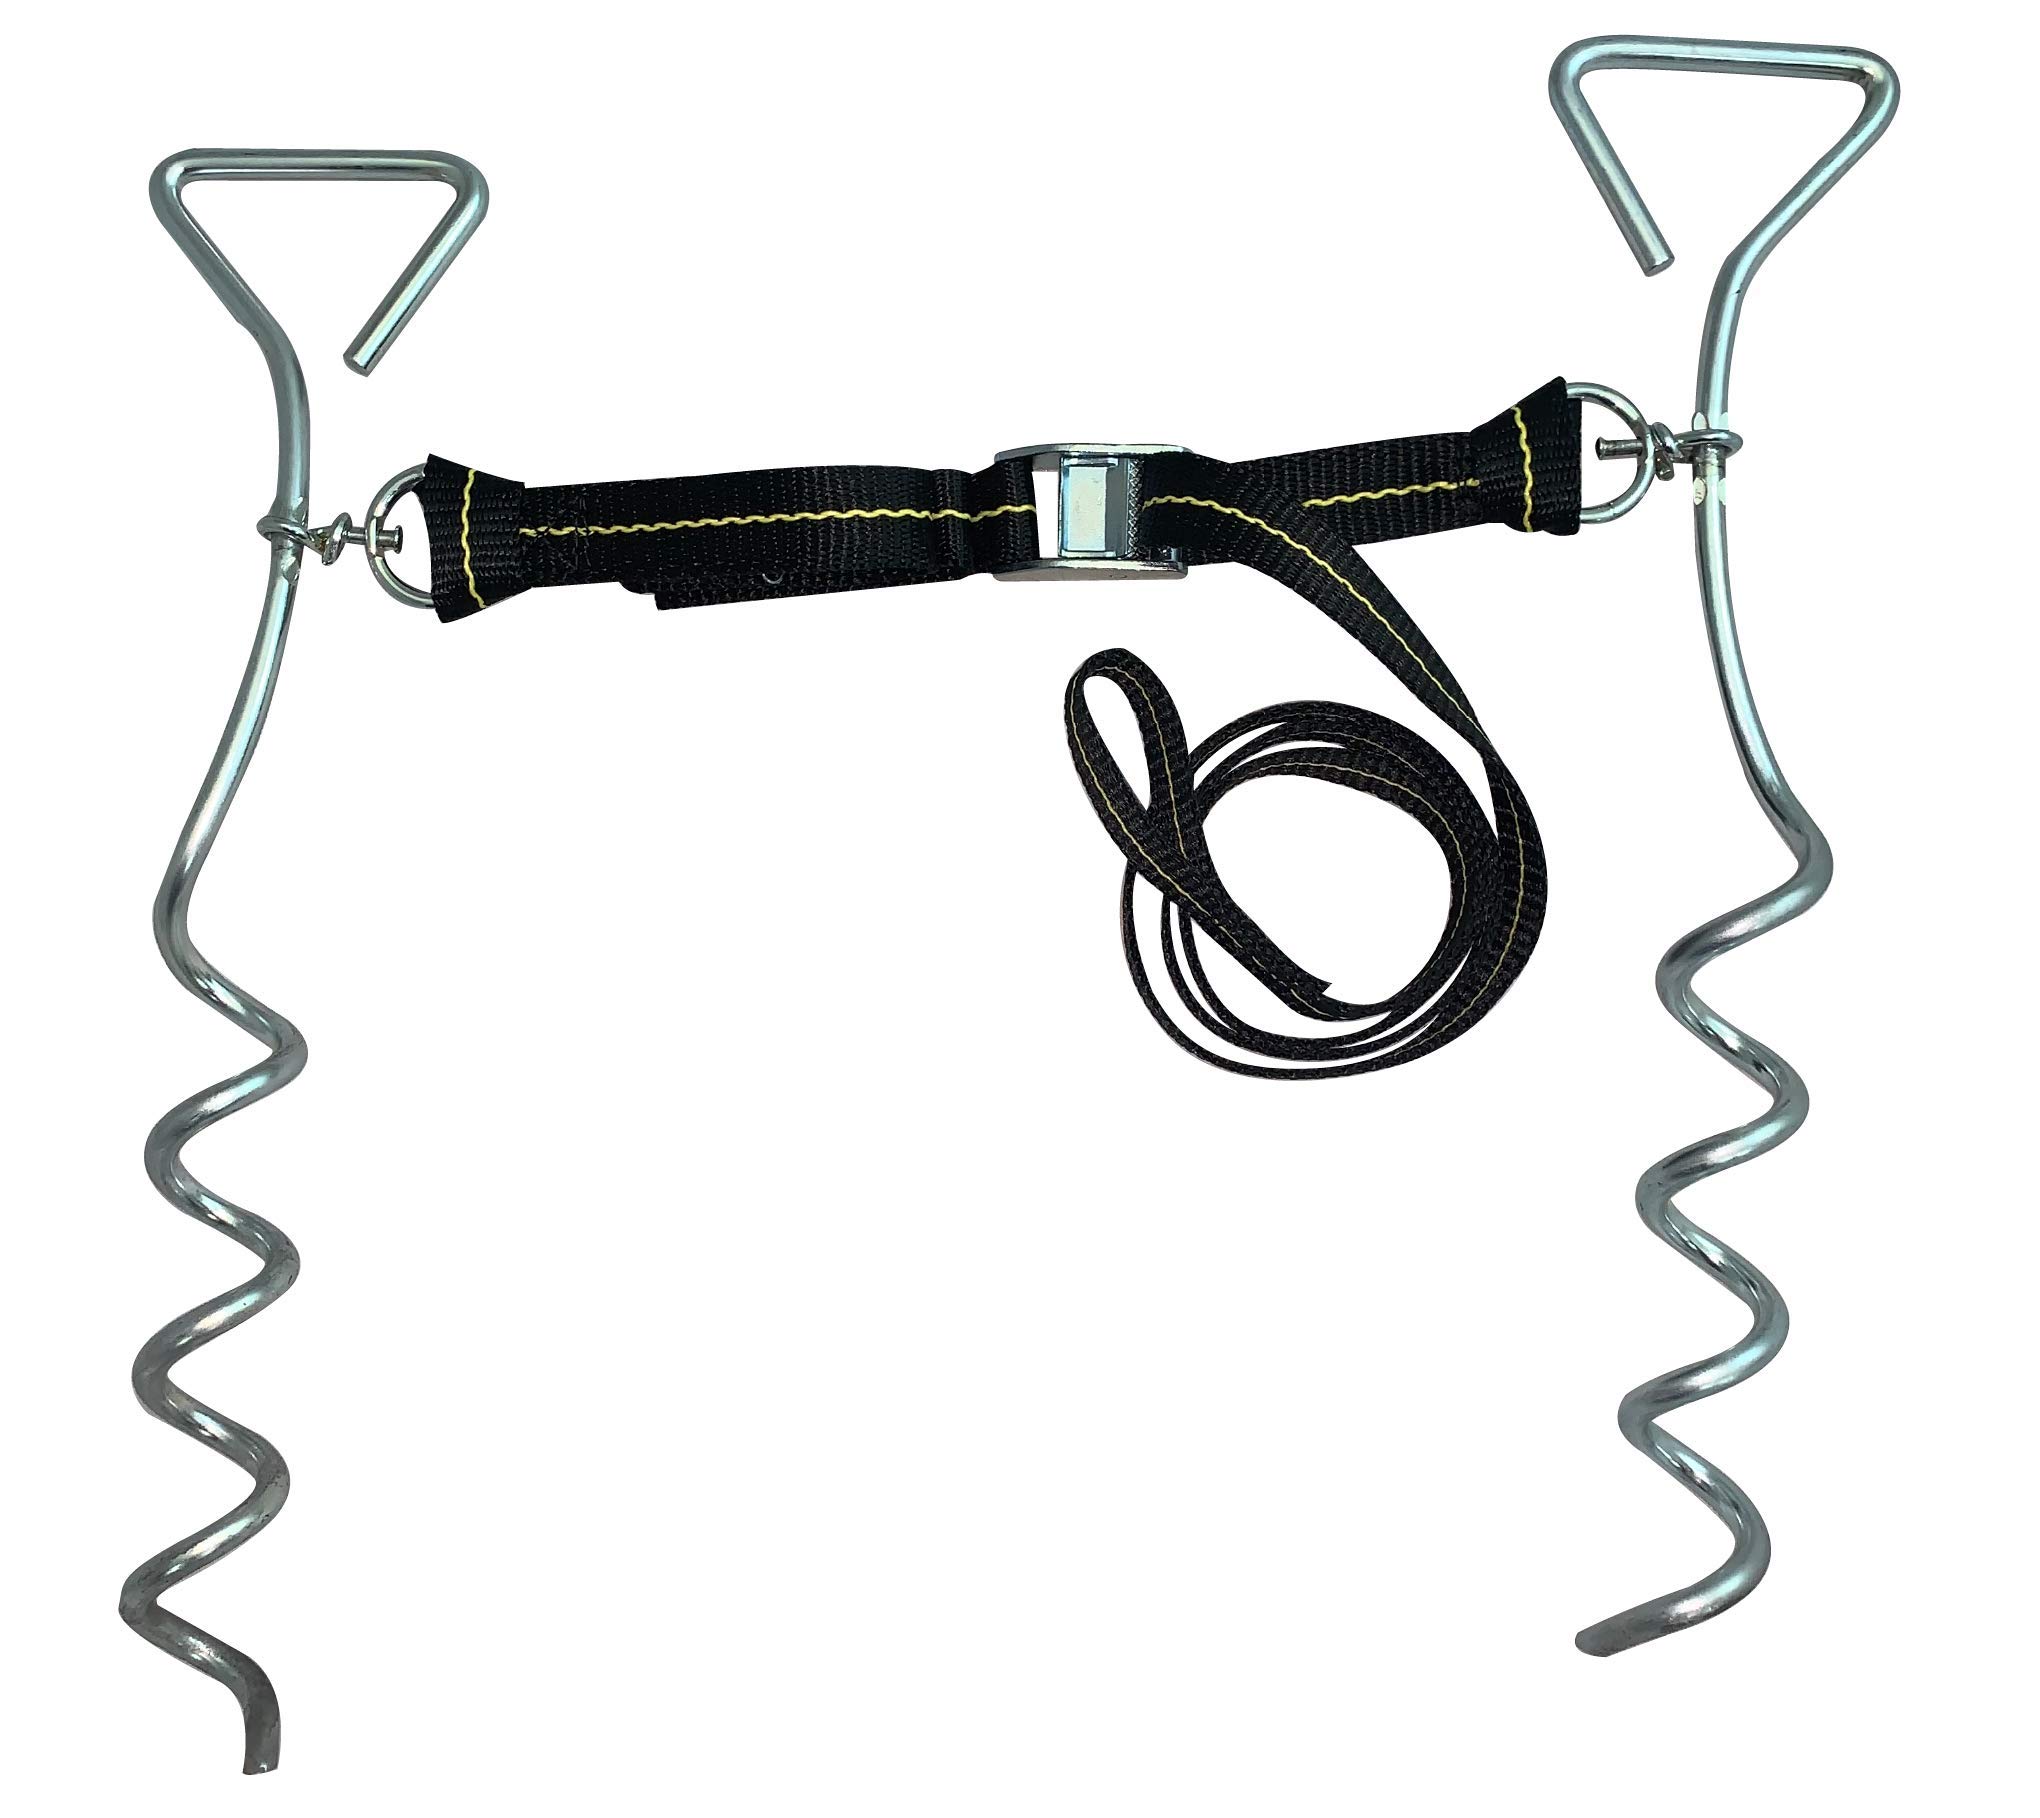 Basket ball goal anchor kit - 2 screw in ground anchors with a cambuckle strap between the two anchors